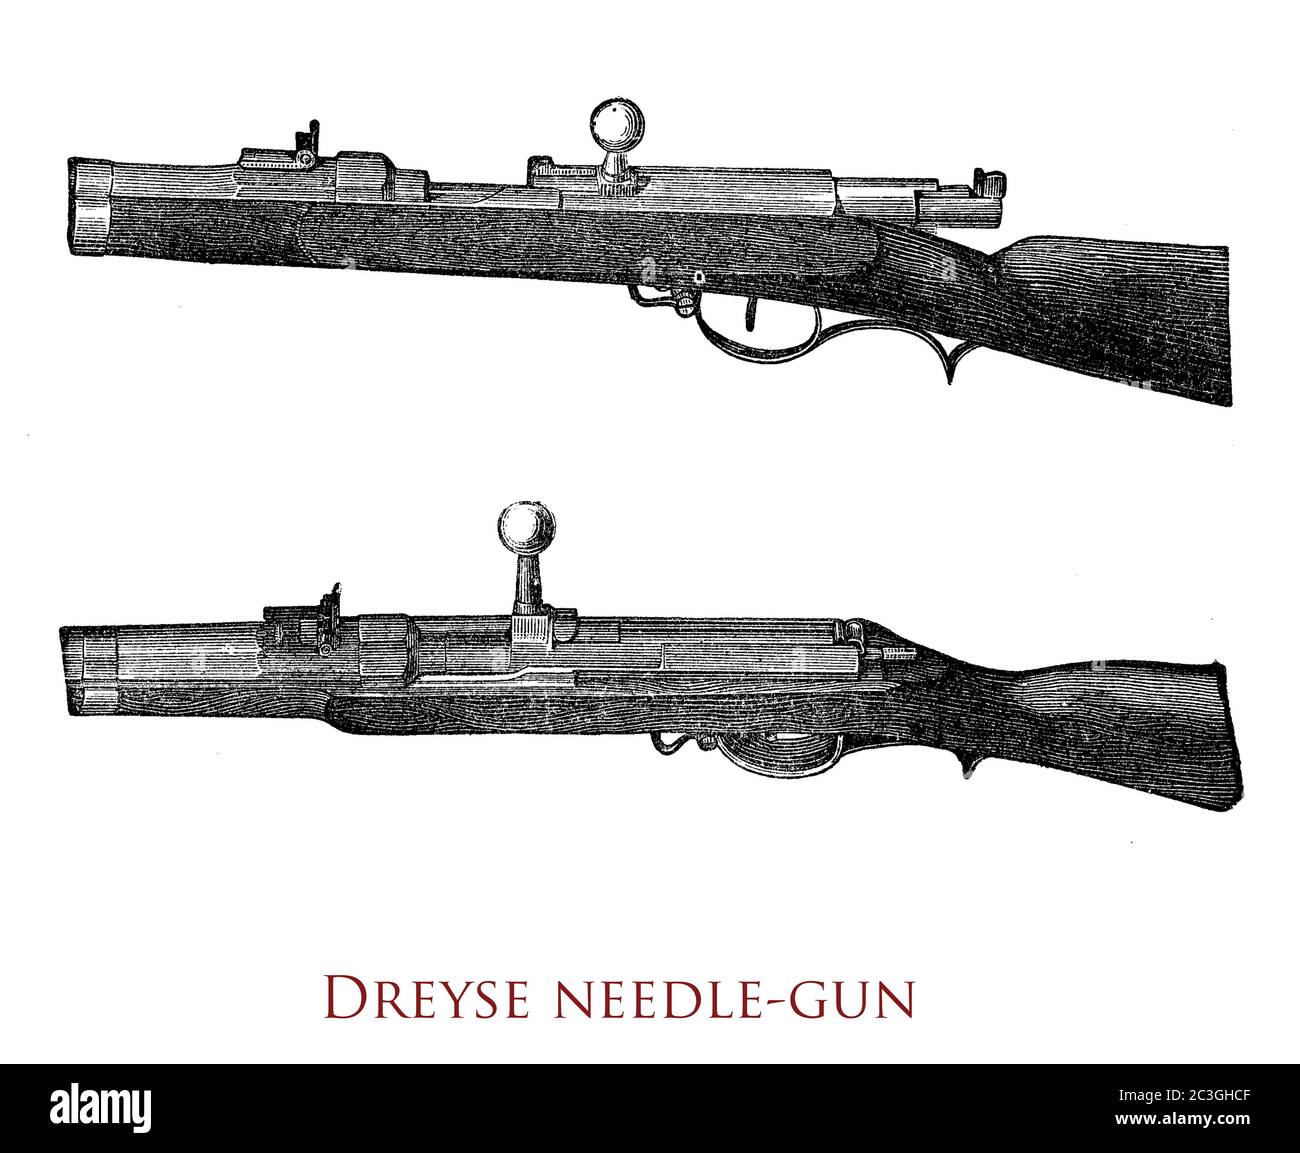 Dreyse, needle-gun, an ignition needle rifle with firing pin used by Prussian army since from 1841 invented by Johann Nikolaus von Dreyse Stock Photo